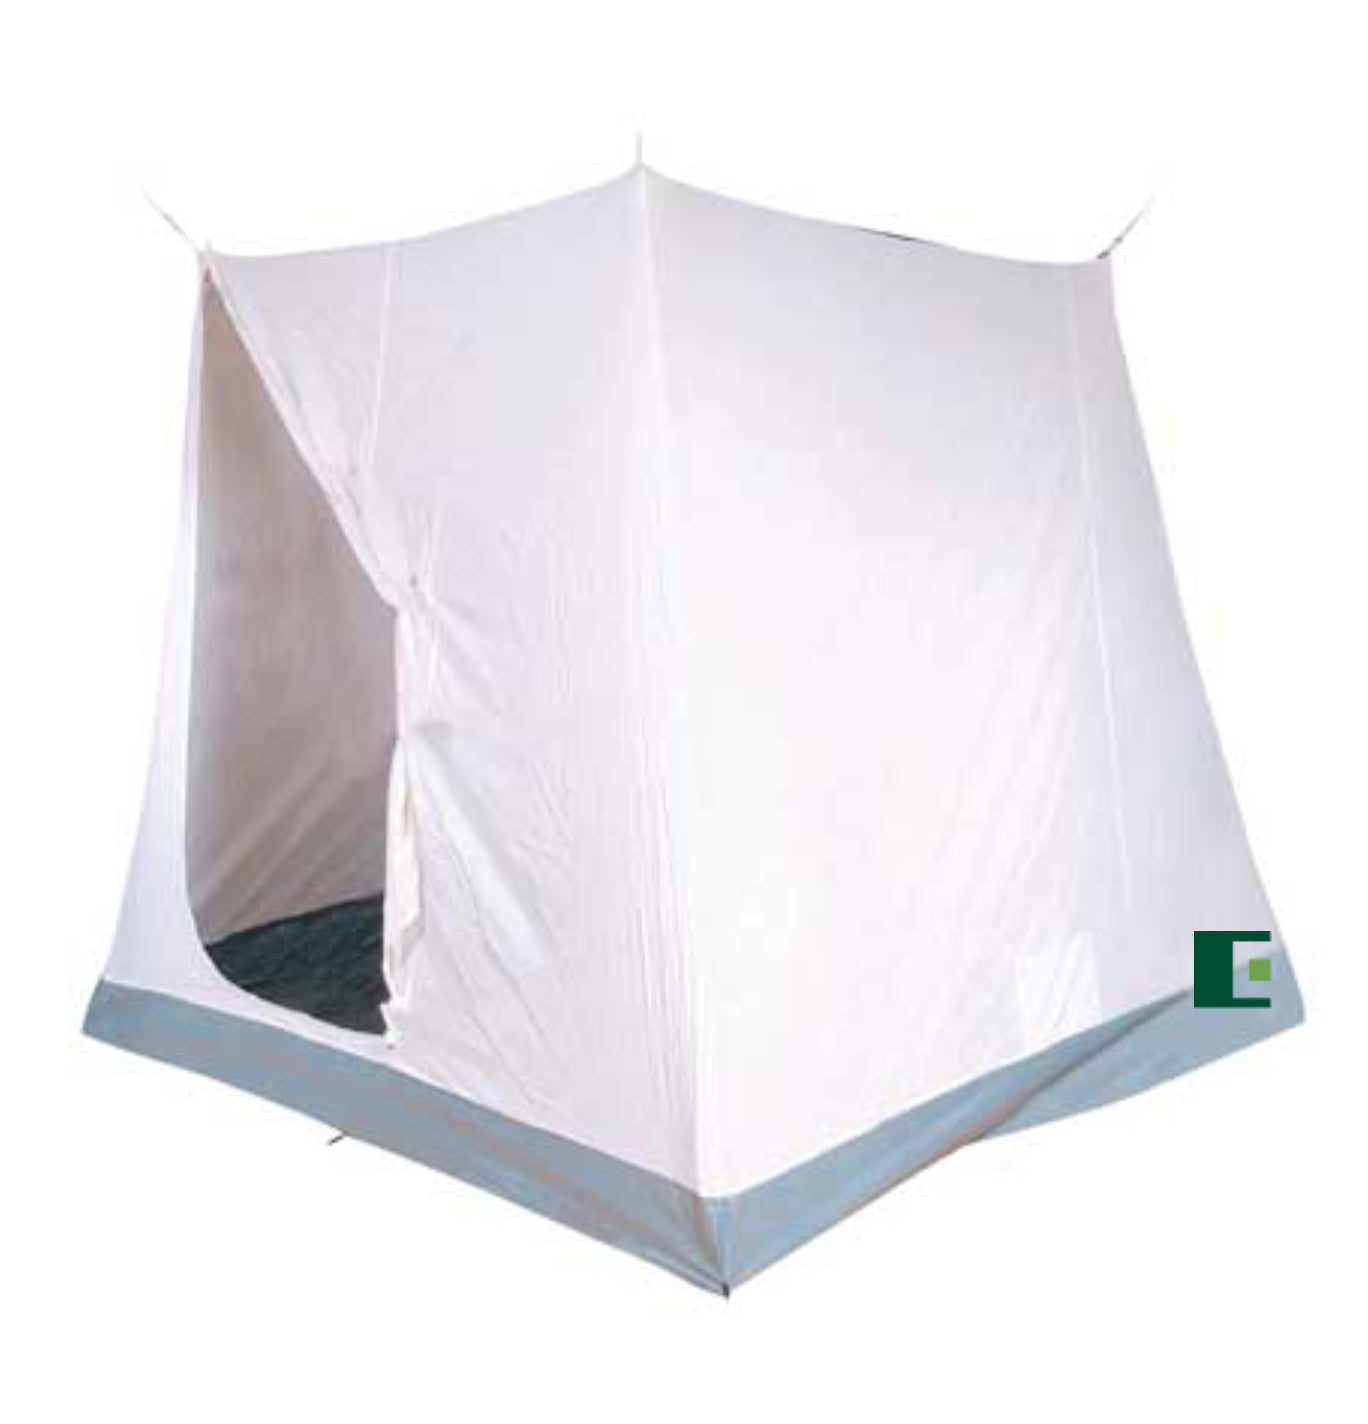 Tour Compact inner tent